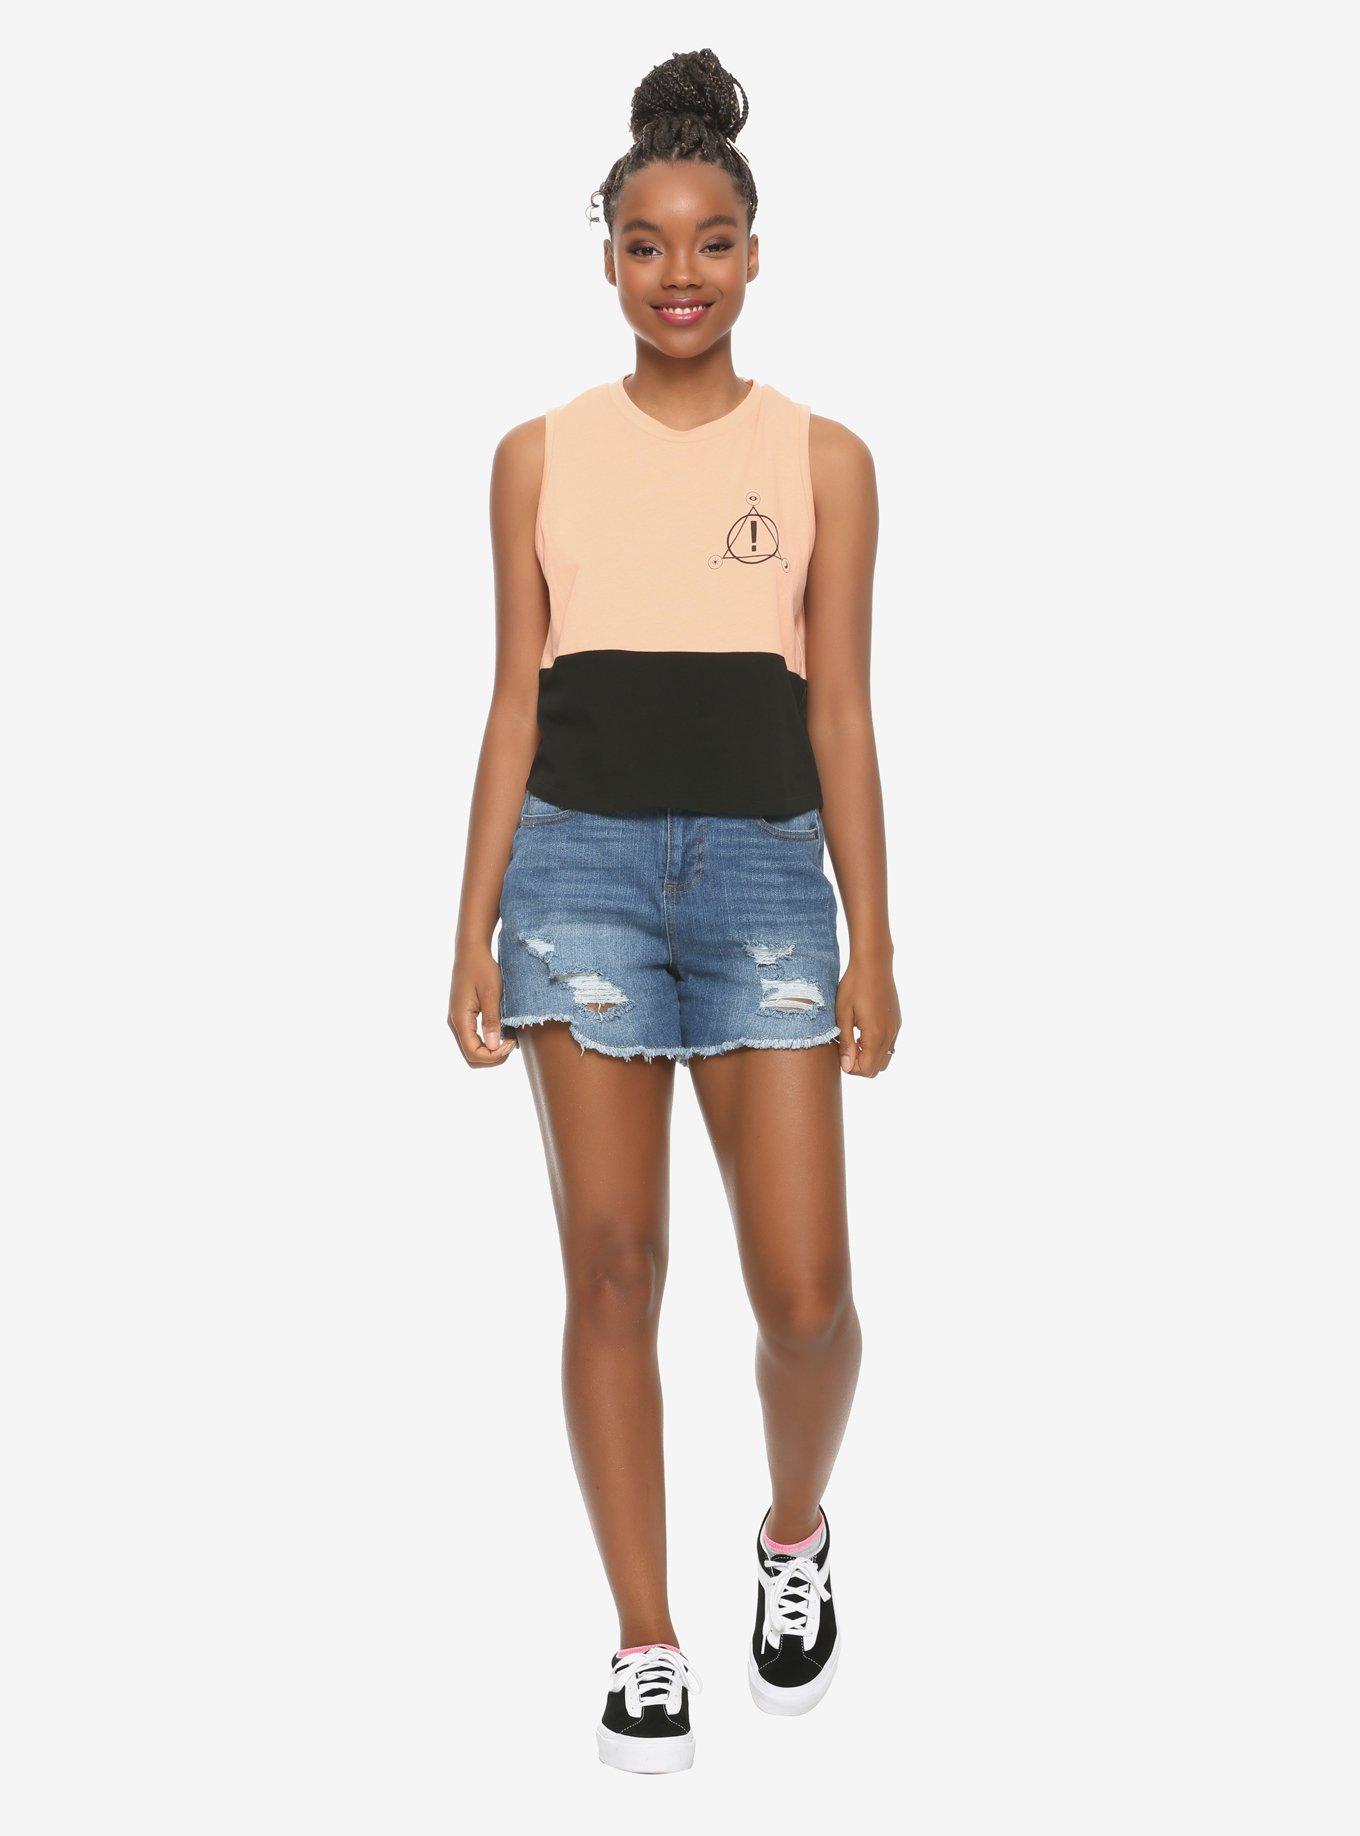 Panic! At The Disco Color-Block Girls Crop Muscle Top, BLACK, alternate